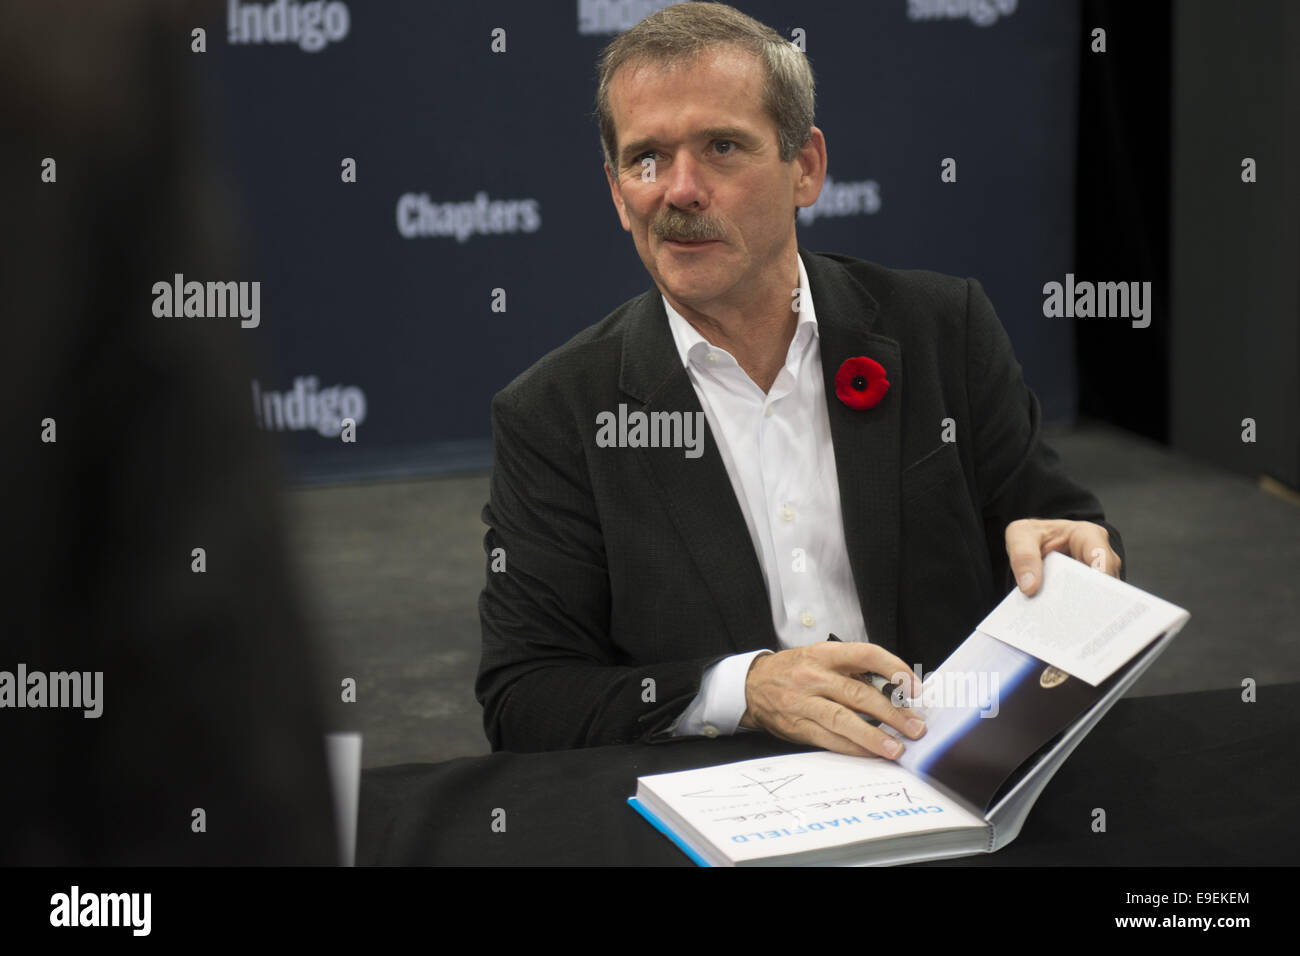 Calgary, Canada. 26th Oct, 2014. Canadian astronaut CHRIS HADFIELD launches new book full of space photography titled ''You Are Here'' and hosts a signing at one of Calgary's Indigo bookstore locations. Credit:  Baden Roth/ZUMA Wire/Alamy Live News Stock Photo